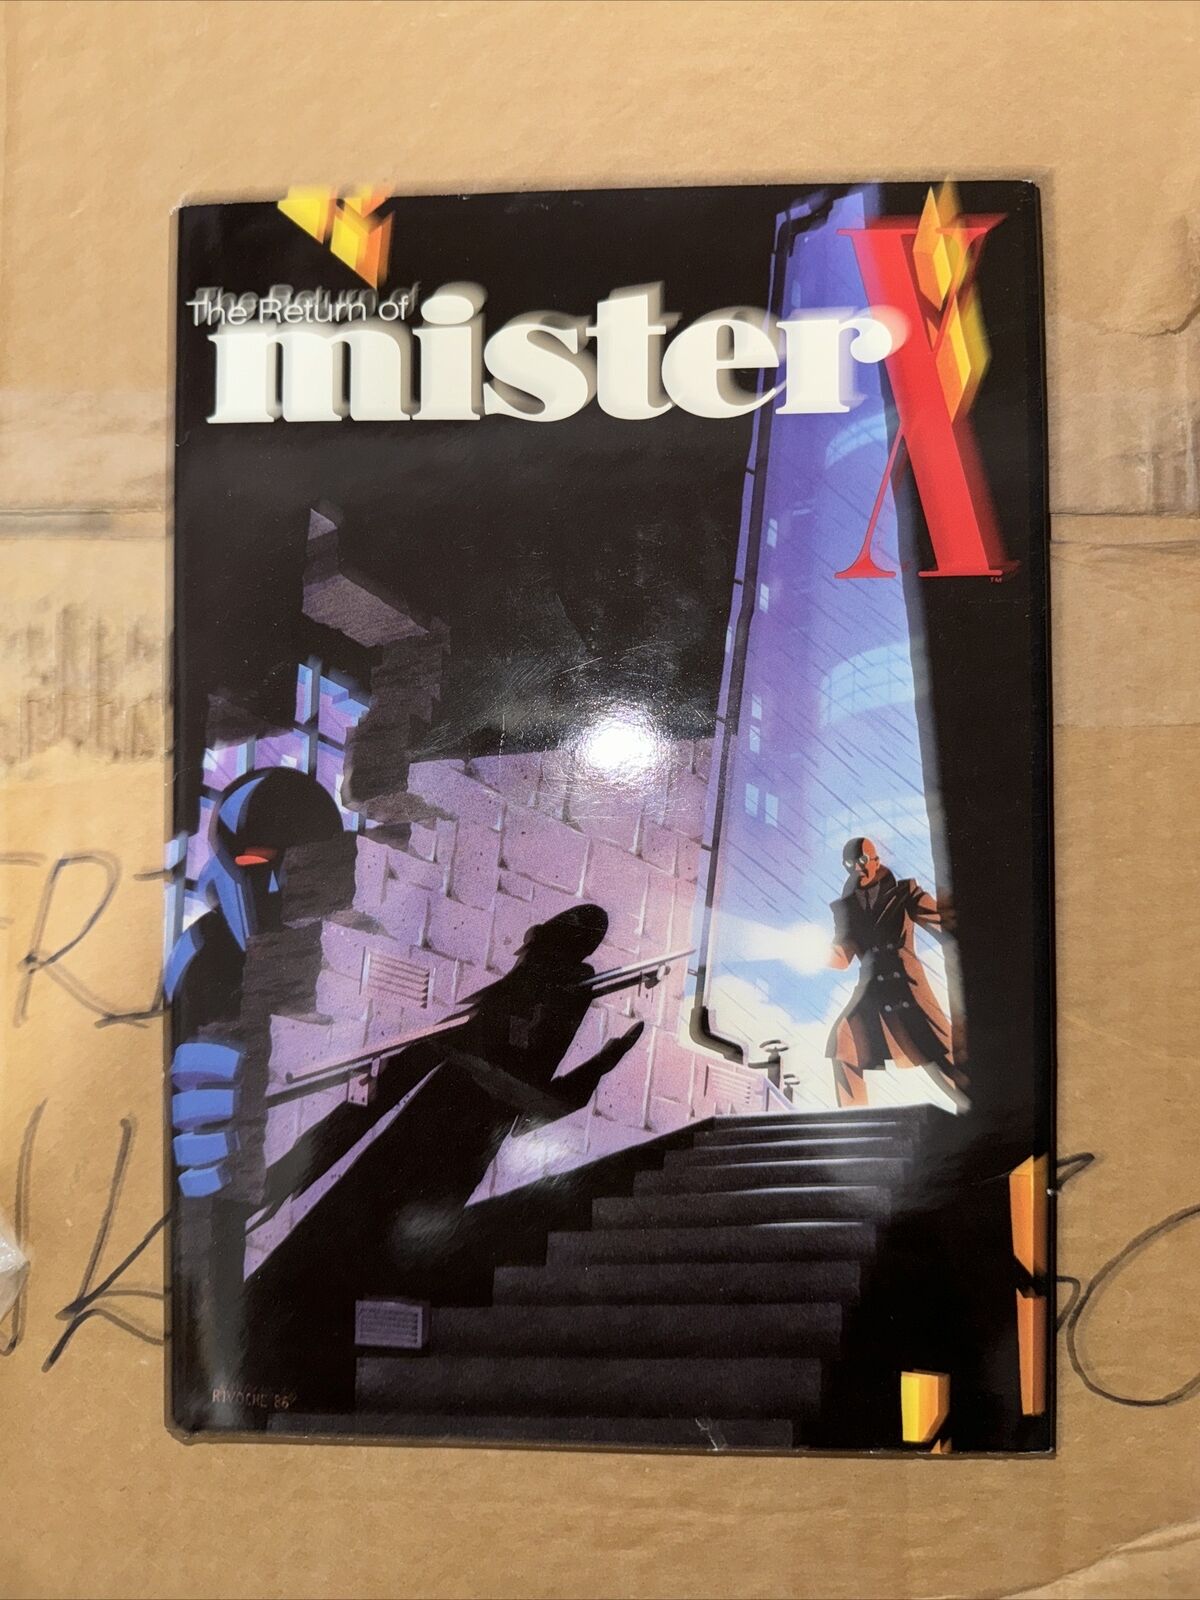 1986 RETURN OF MISTER X by Dean Motter HC/DJ FVF/FN #133/5K SIGNED 5x with Print